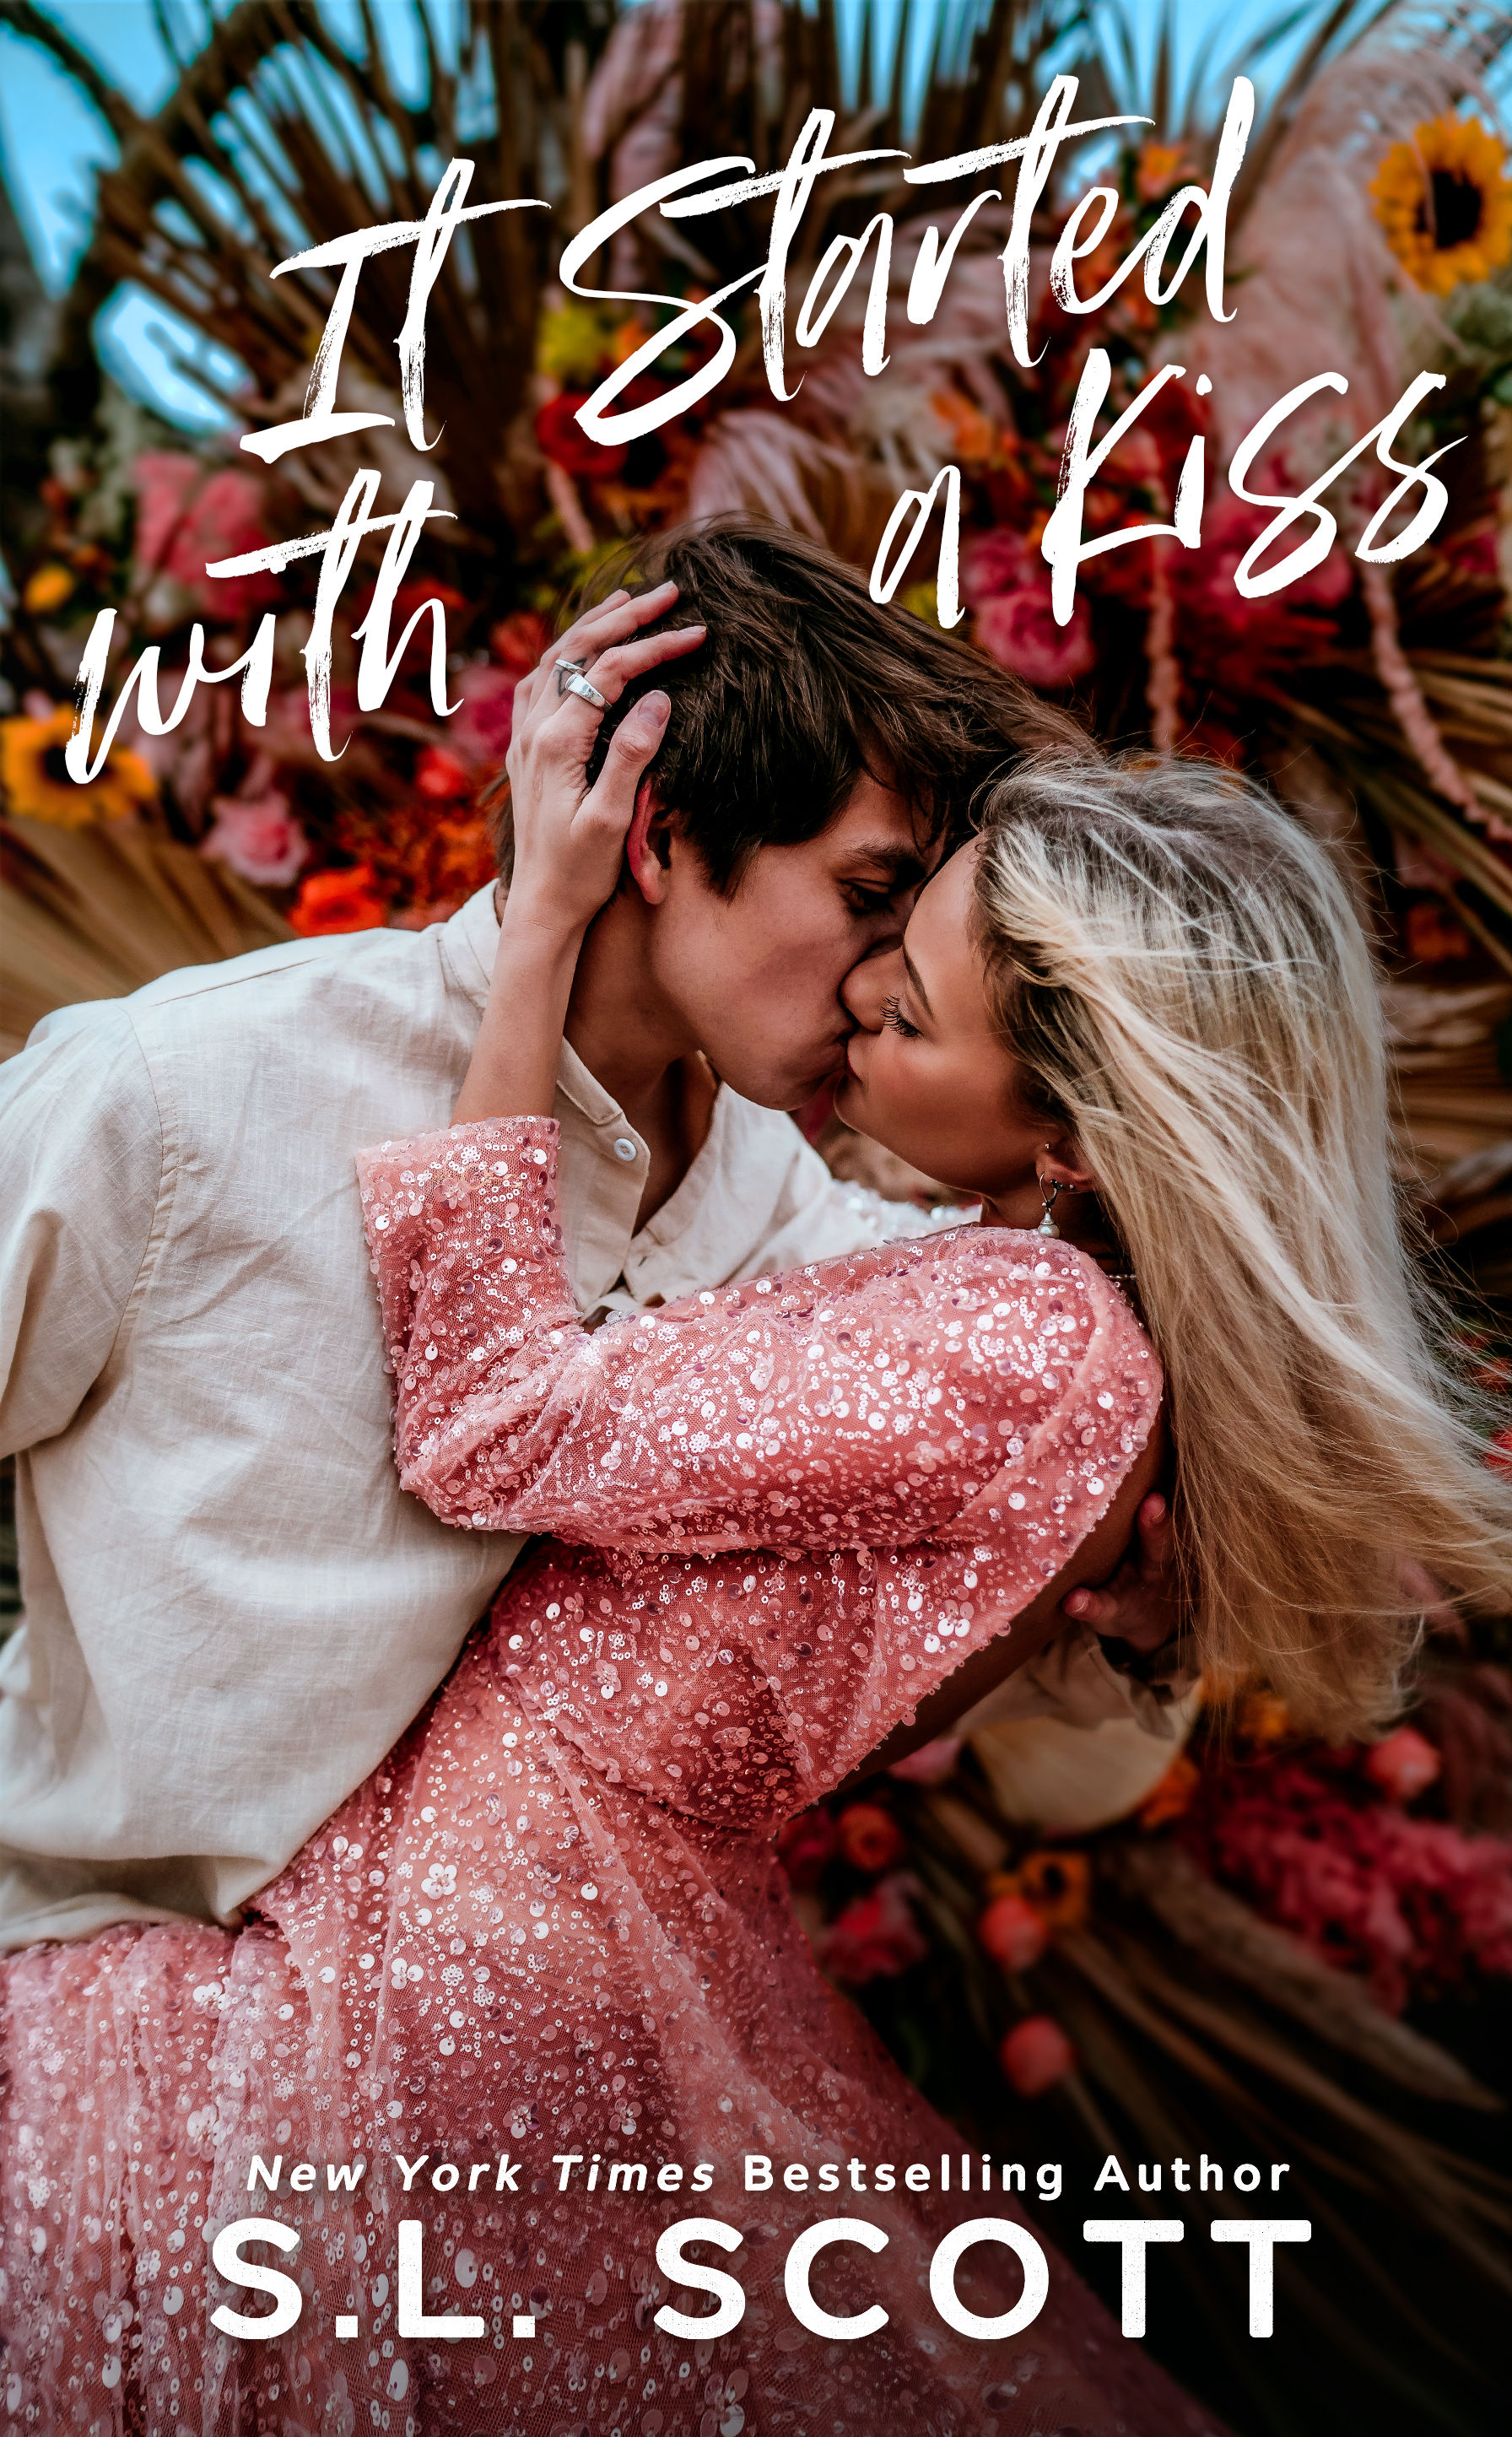 https://ouabb.files.wordpress.com/2022/05/it-started-with-a-kiss-ebook-cover-2.jpg